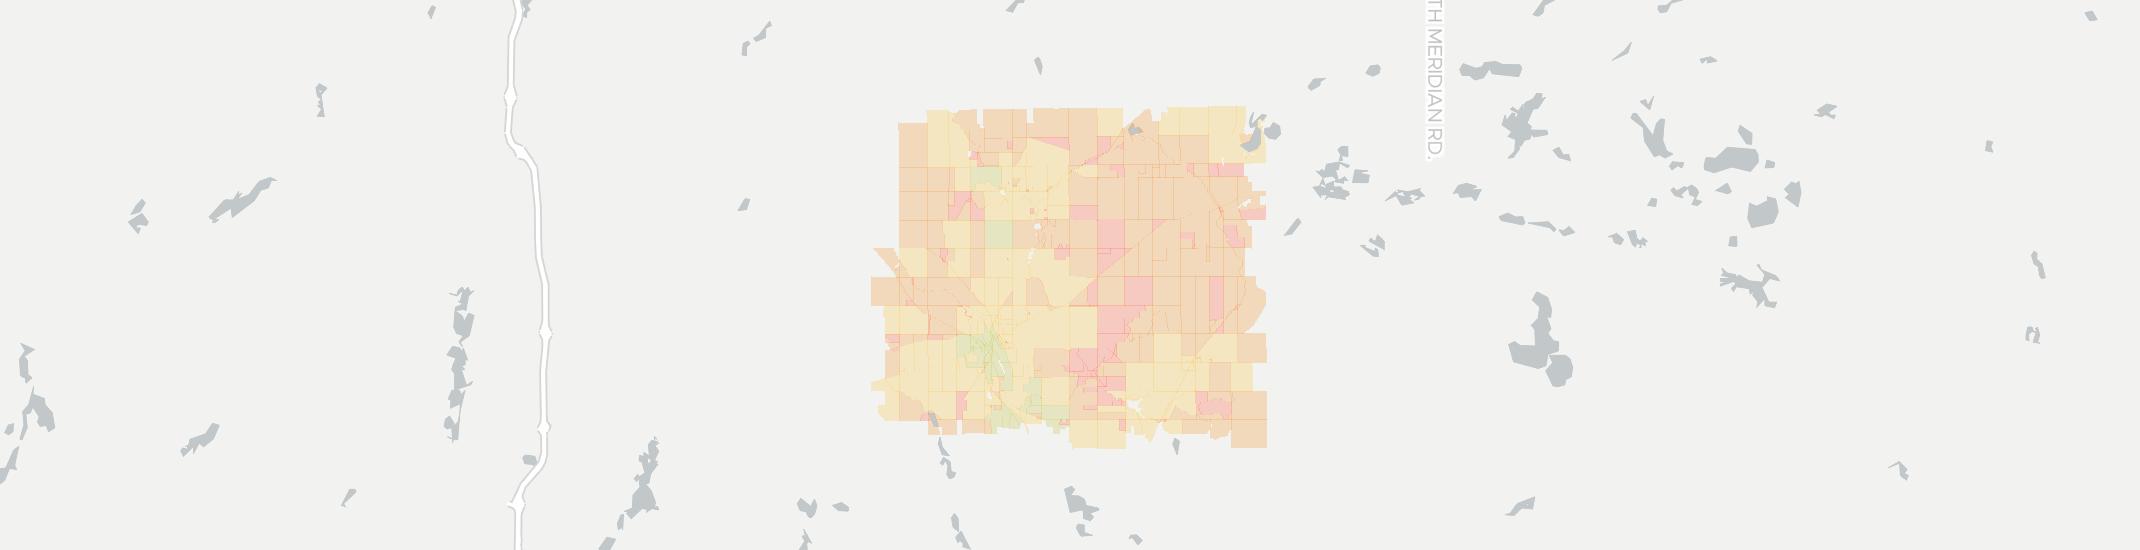 Jonesville Internet Competition Map. Click for interactive map